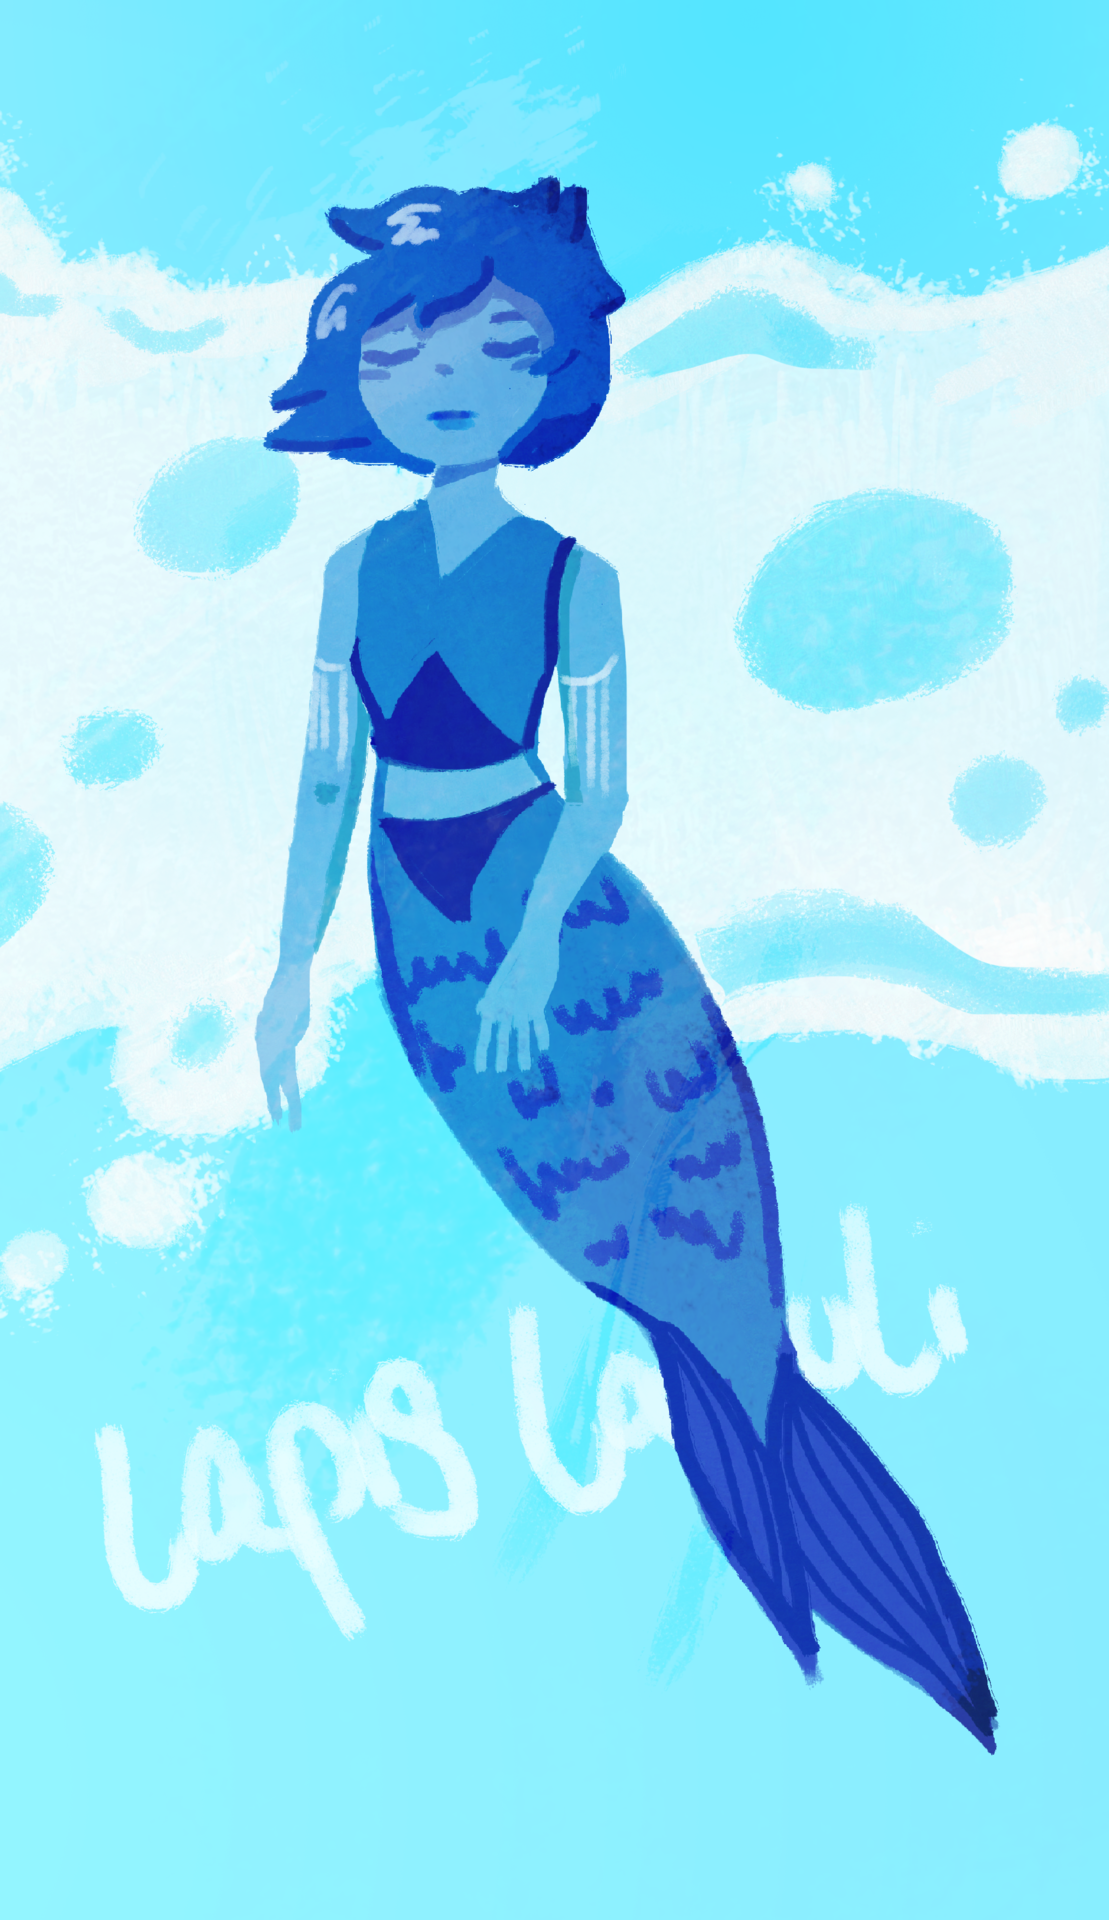 It’s lapis! I’d figure she’d look snazzy as a mermaid.